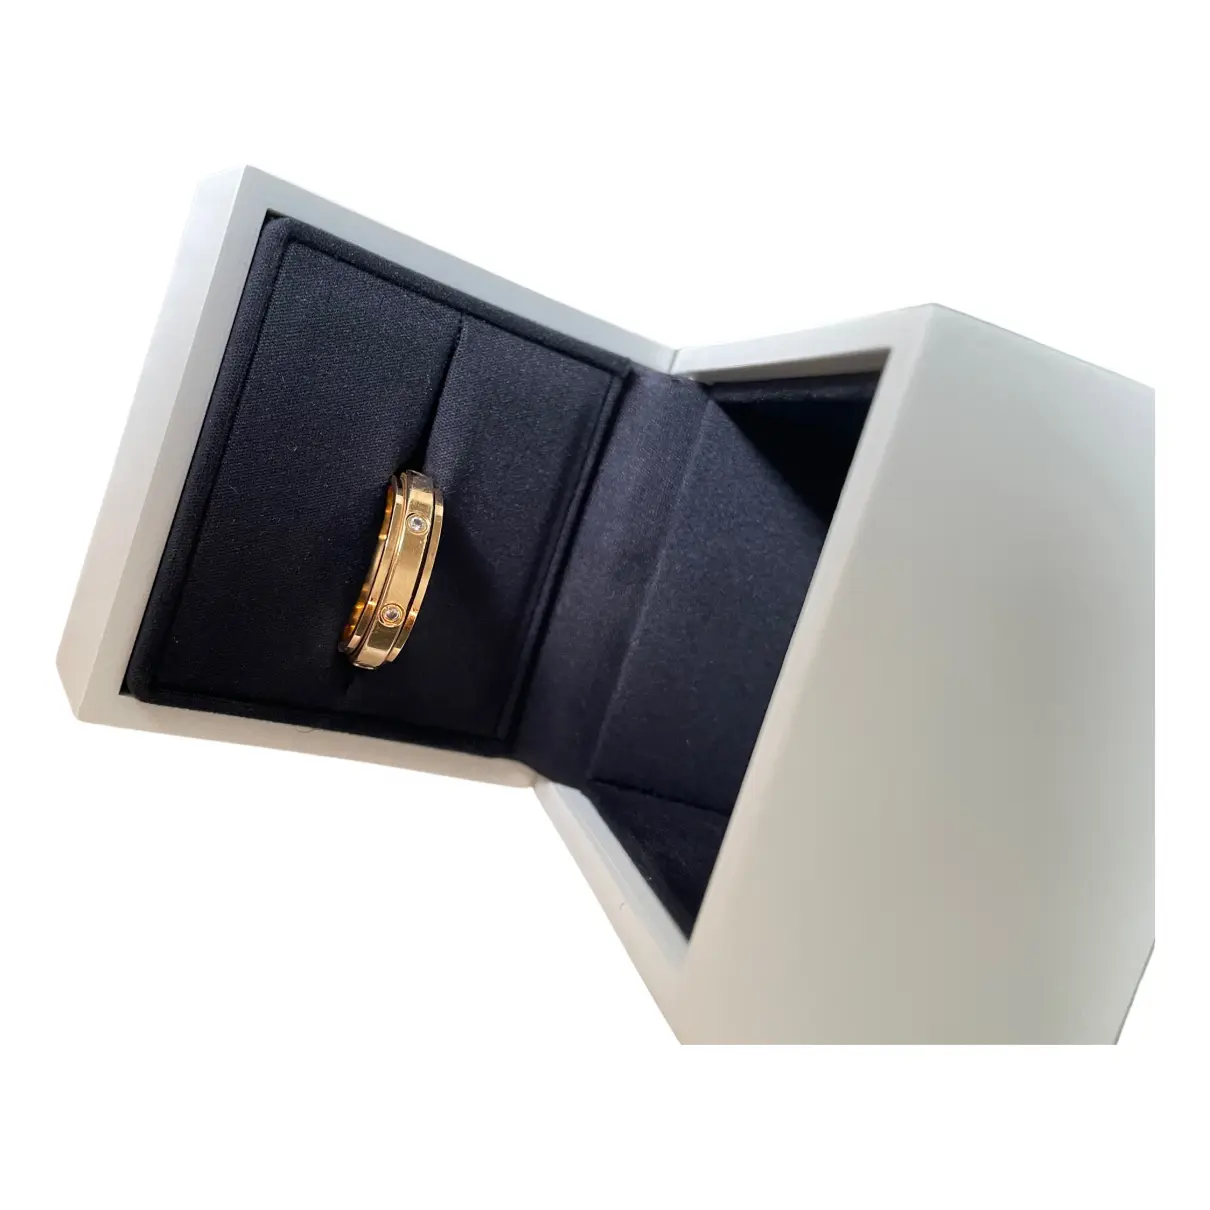 Buy Piaget Possession yellow gold ring online